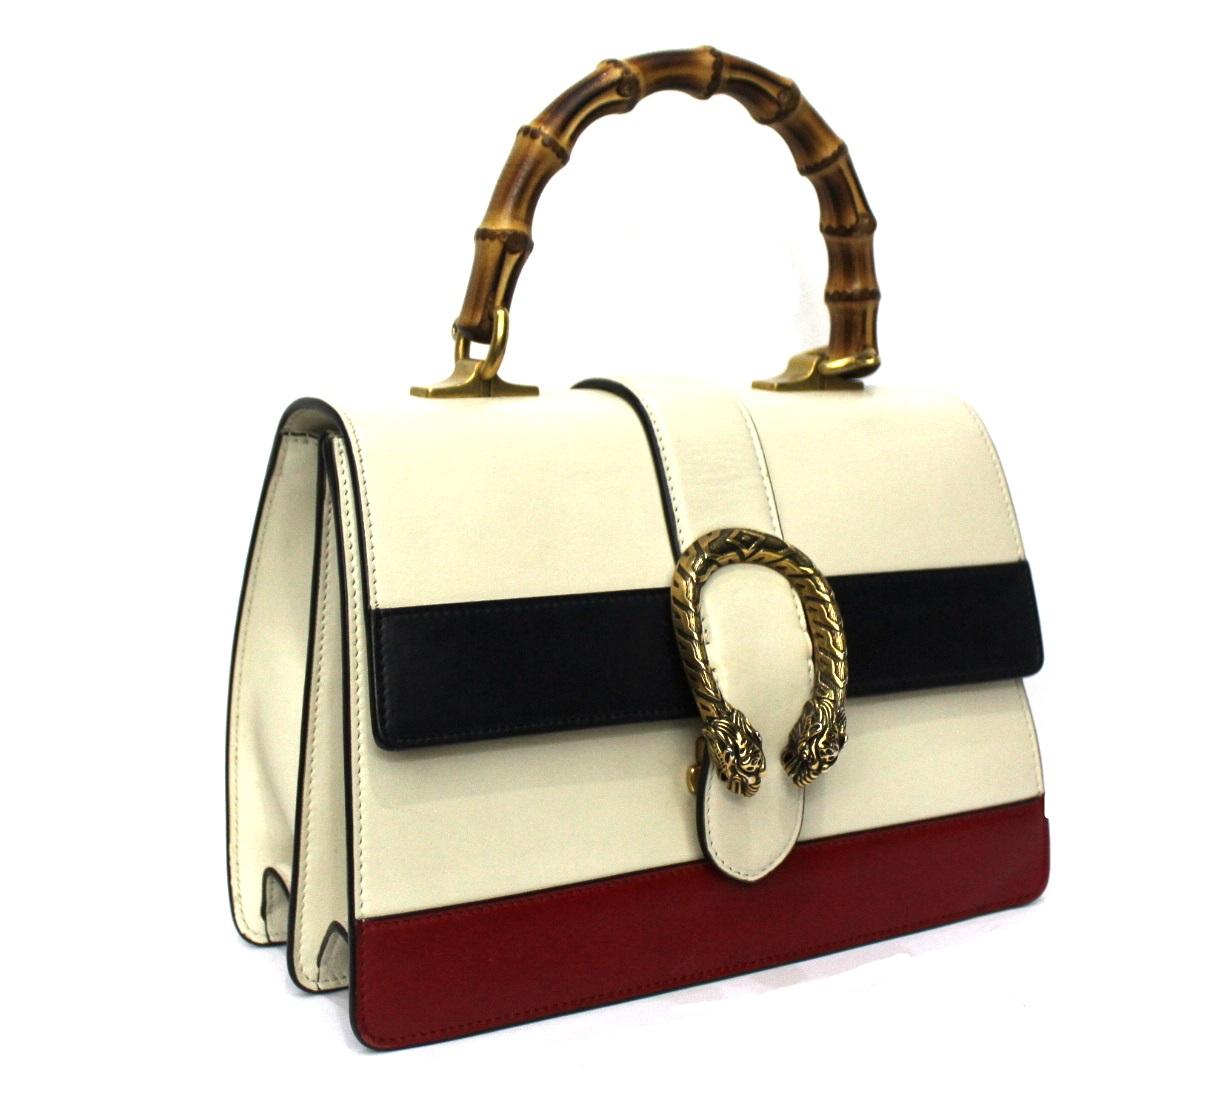 Fabulous Gucci Dionysus line bag made in white, red and blue leather with web strap and bamboo top handle.

Closure with slider, internally quite large.

The bag is in excellent condition.